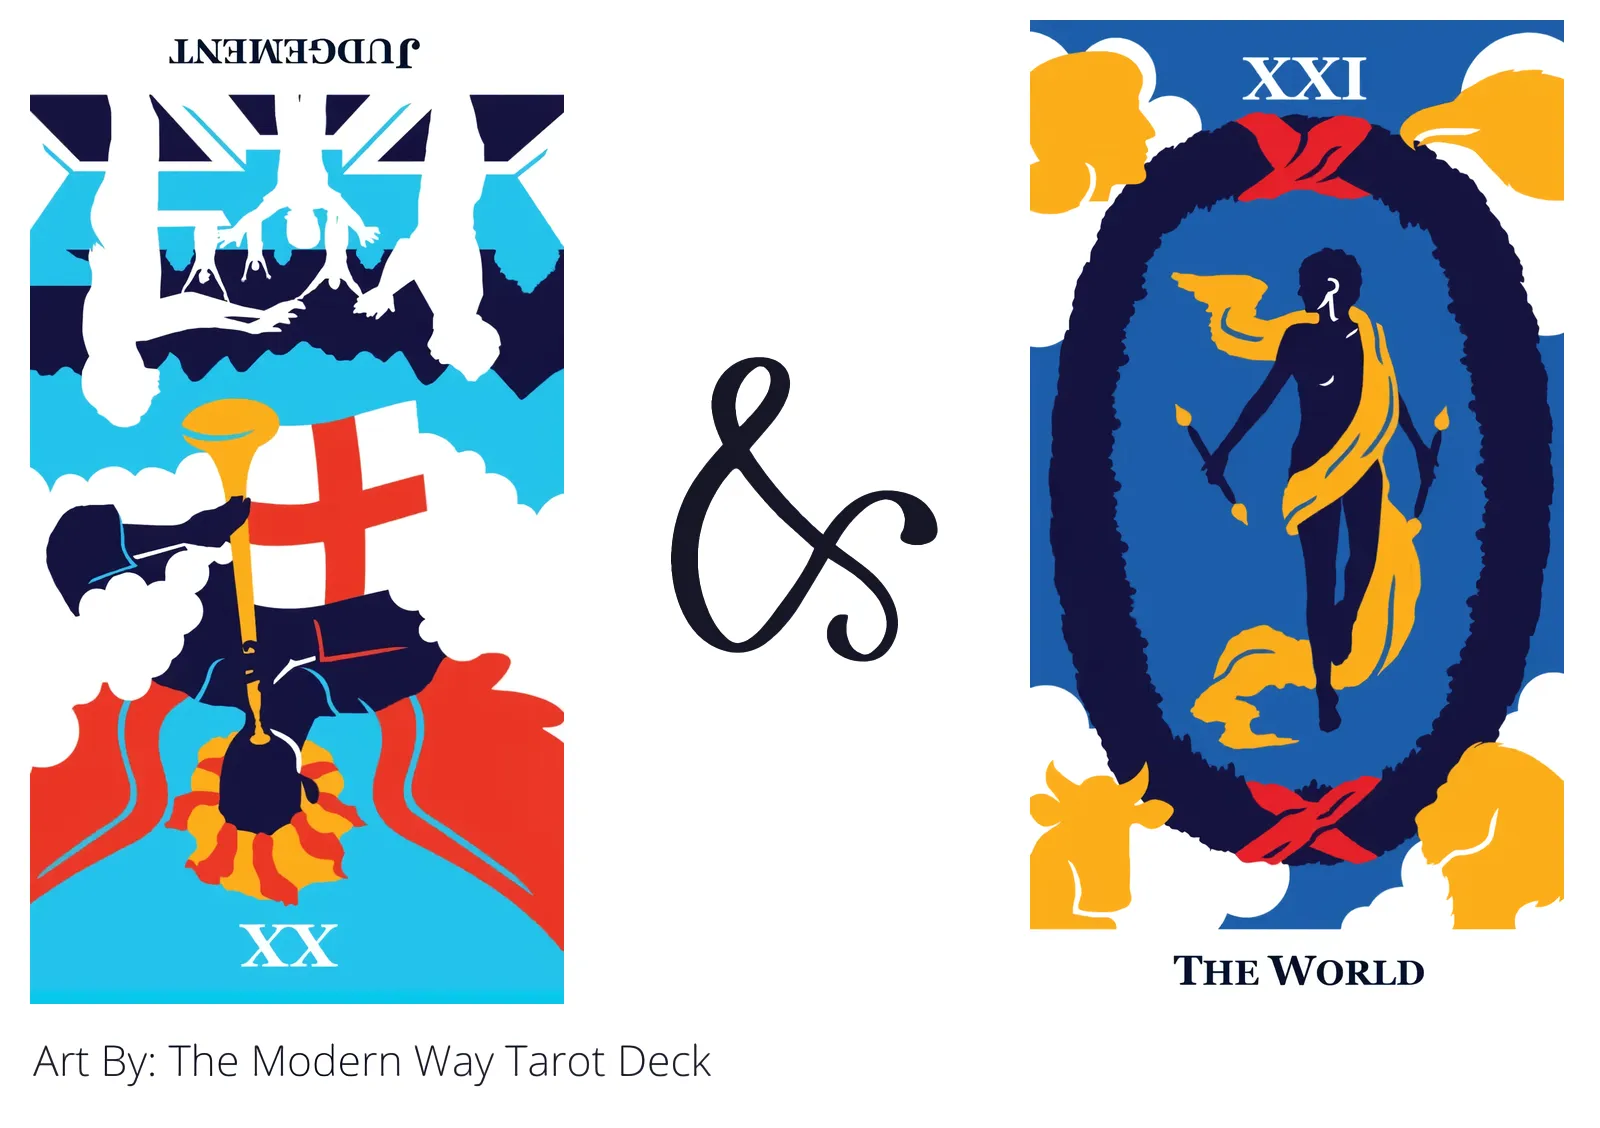 judgement reversed and the world tarot cards together